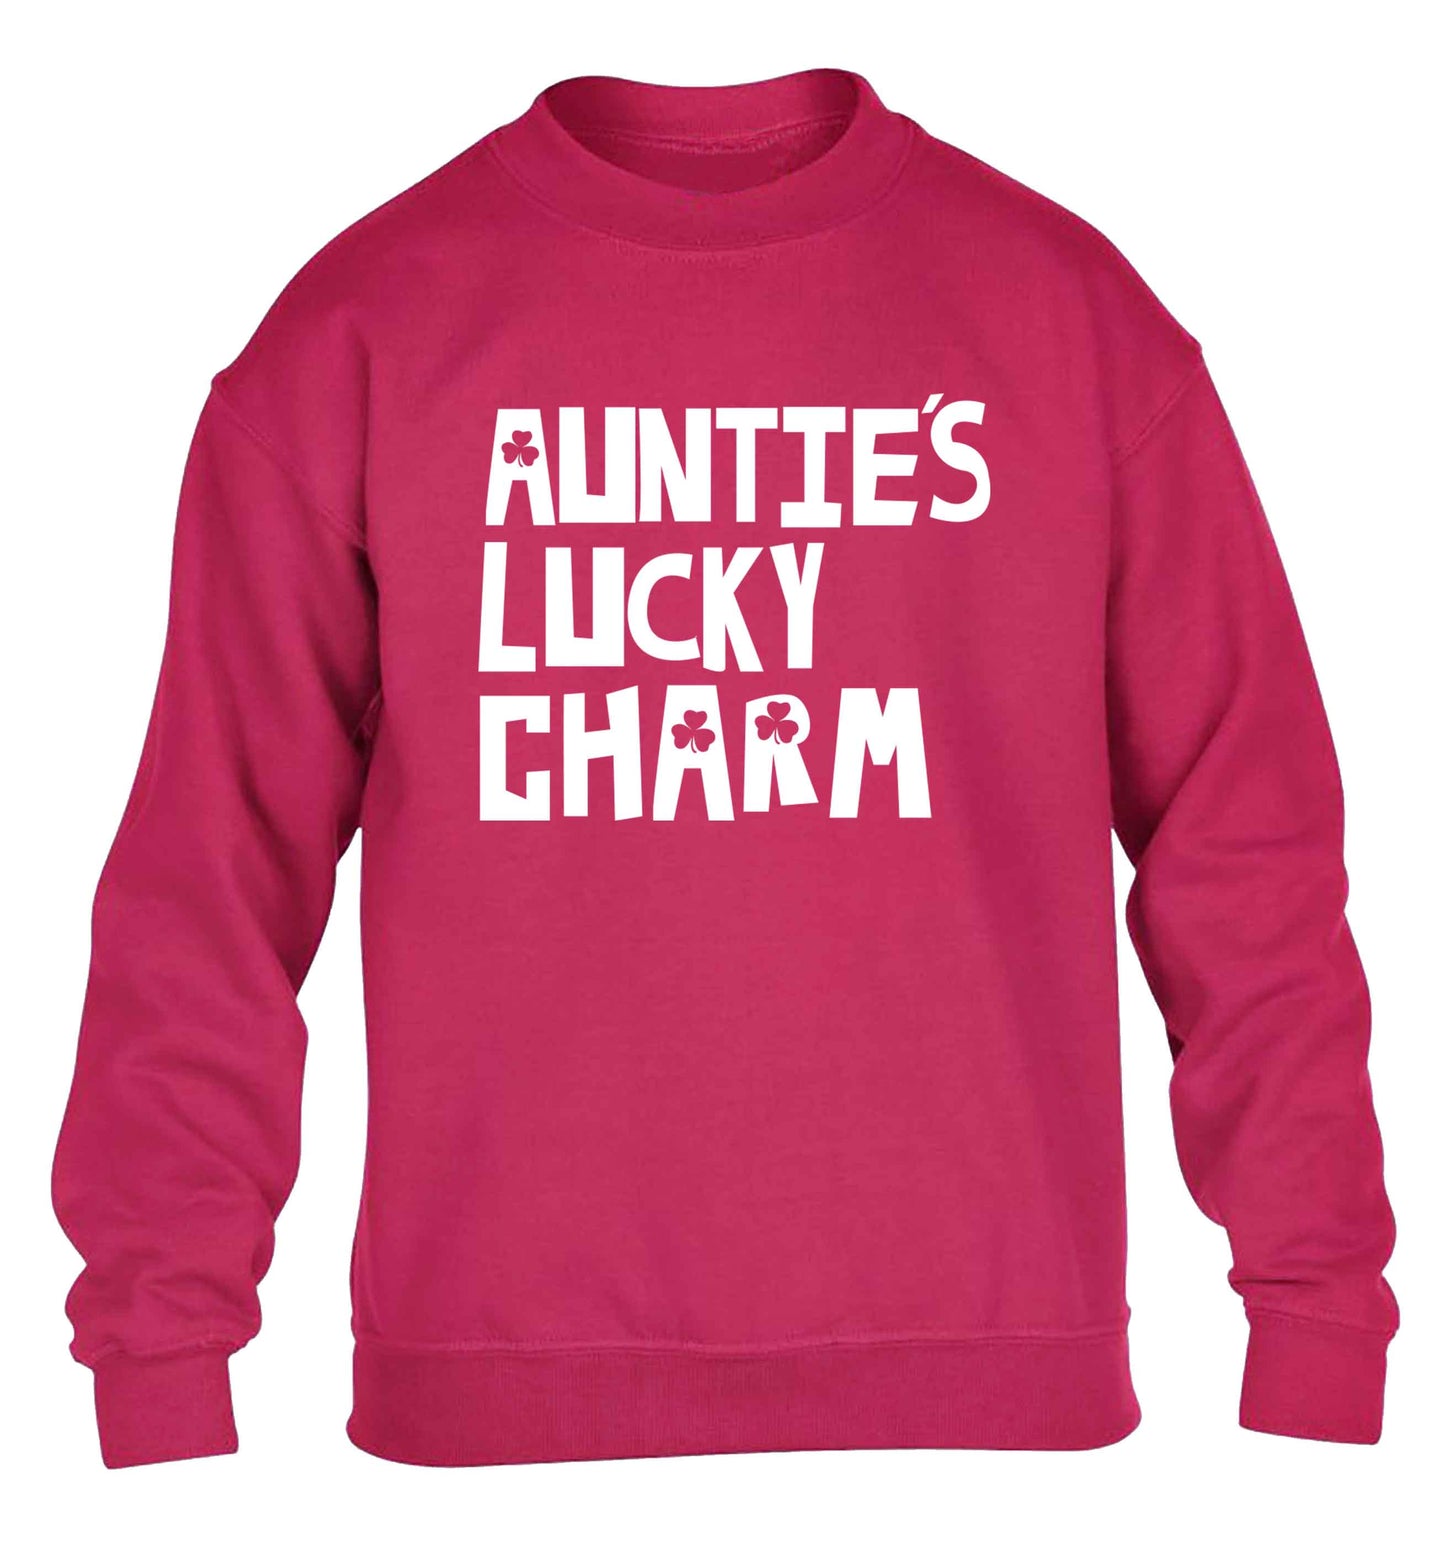 Auntie's lucky charm children's pink sweater 12-13 Years